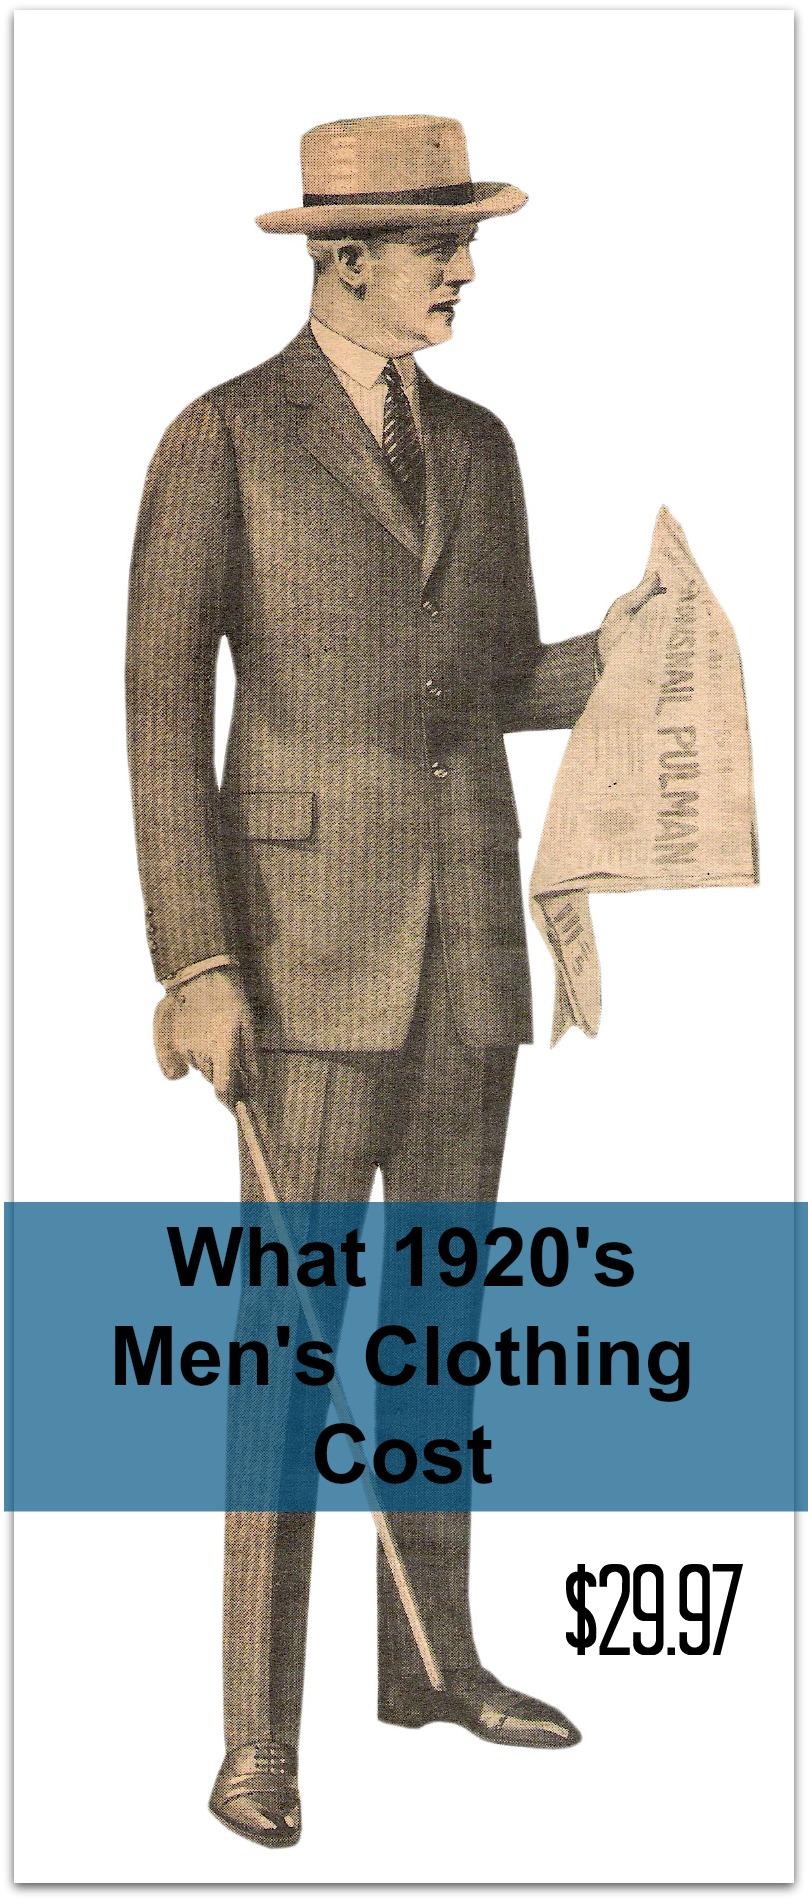 What Did 1920s Men’s Clothing Cost?